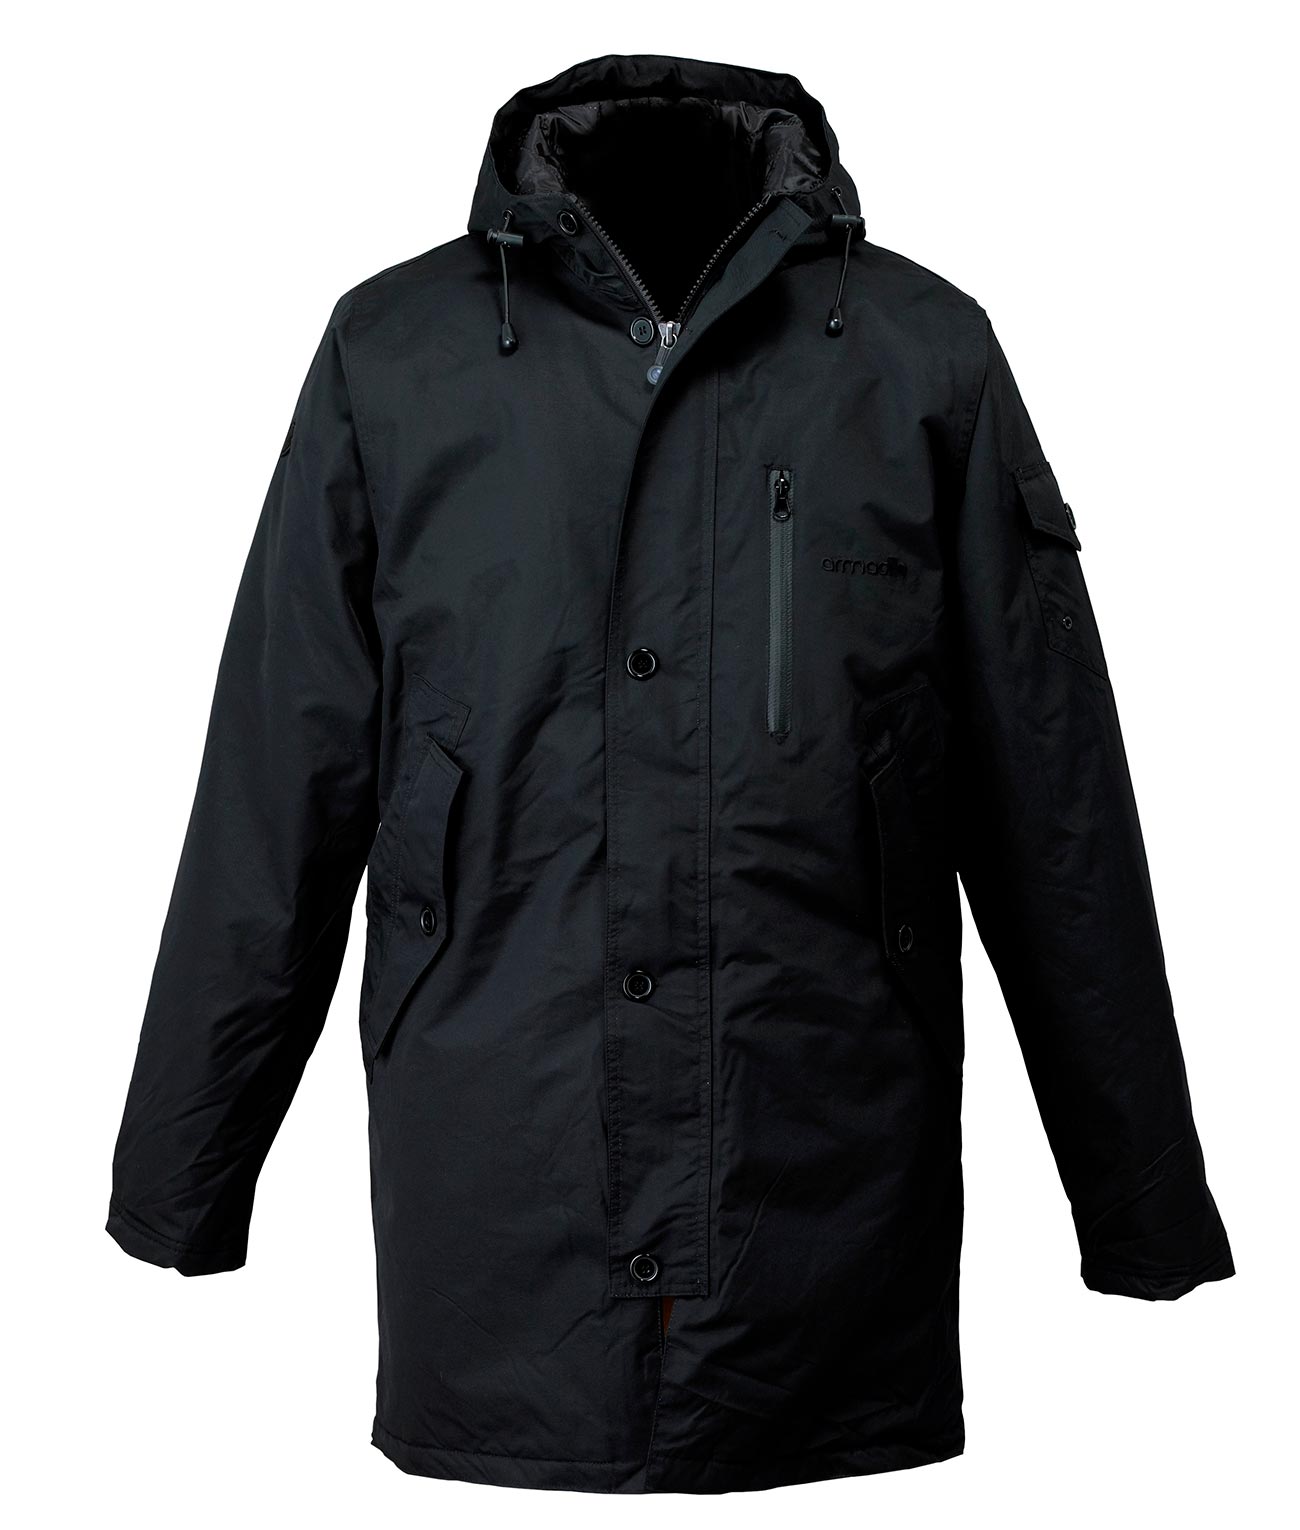 Men's Scooter Parka in Black by Armadillo - Armadillo Scooterwear